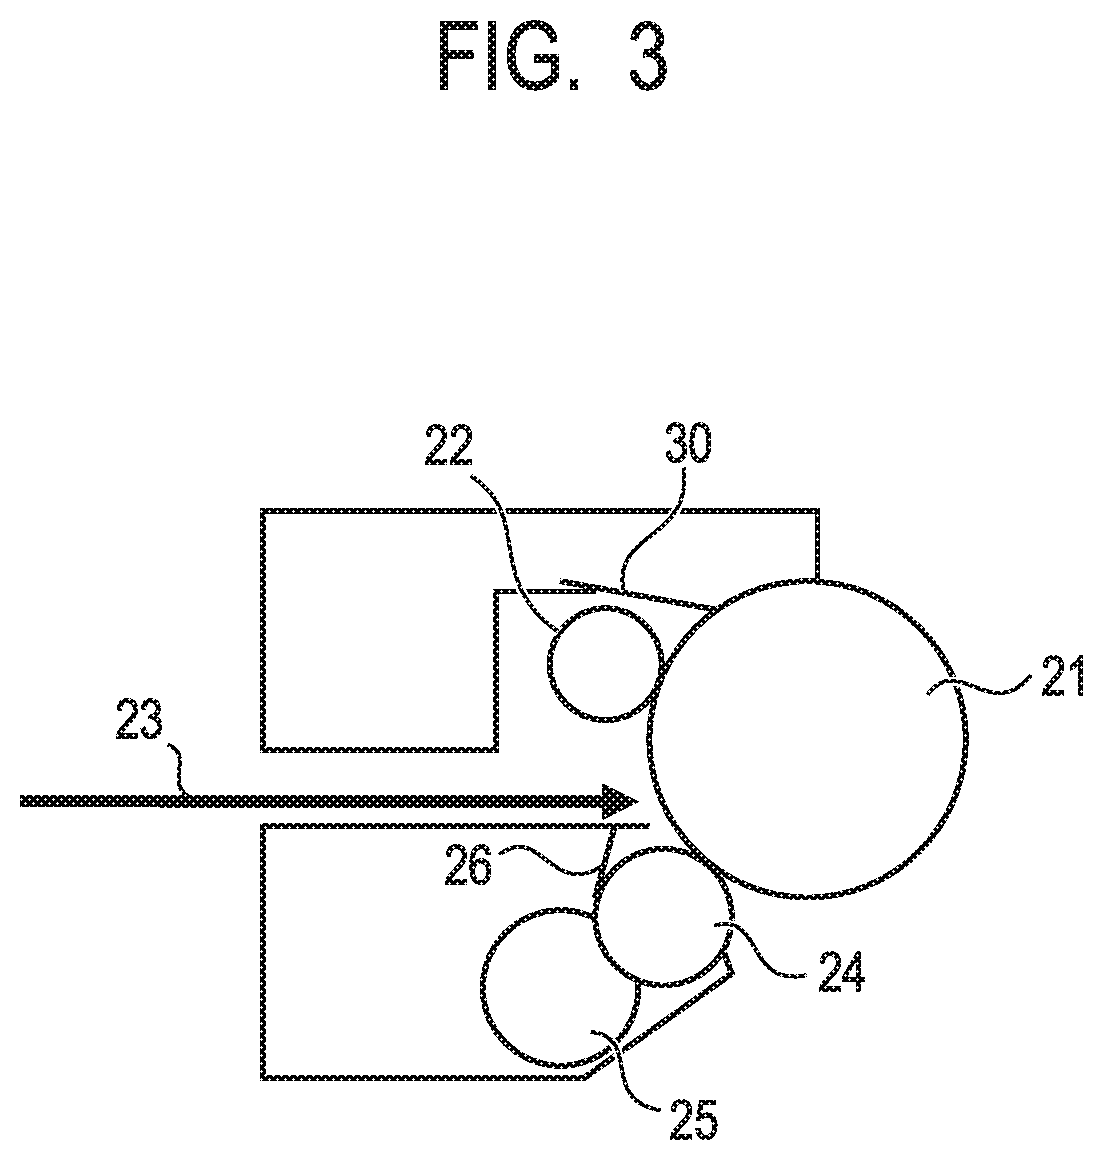 Developing member, process cartridge, and electrophotographic image forming apparatus